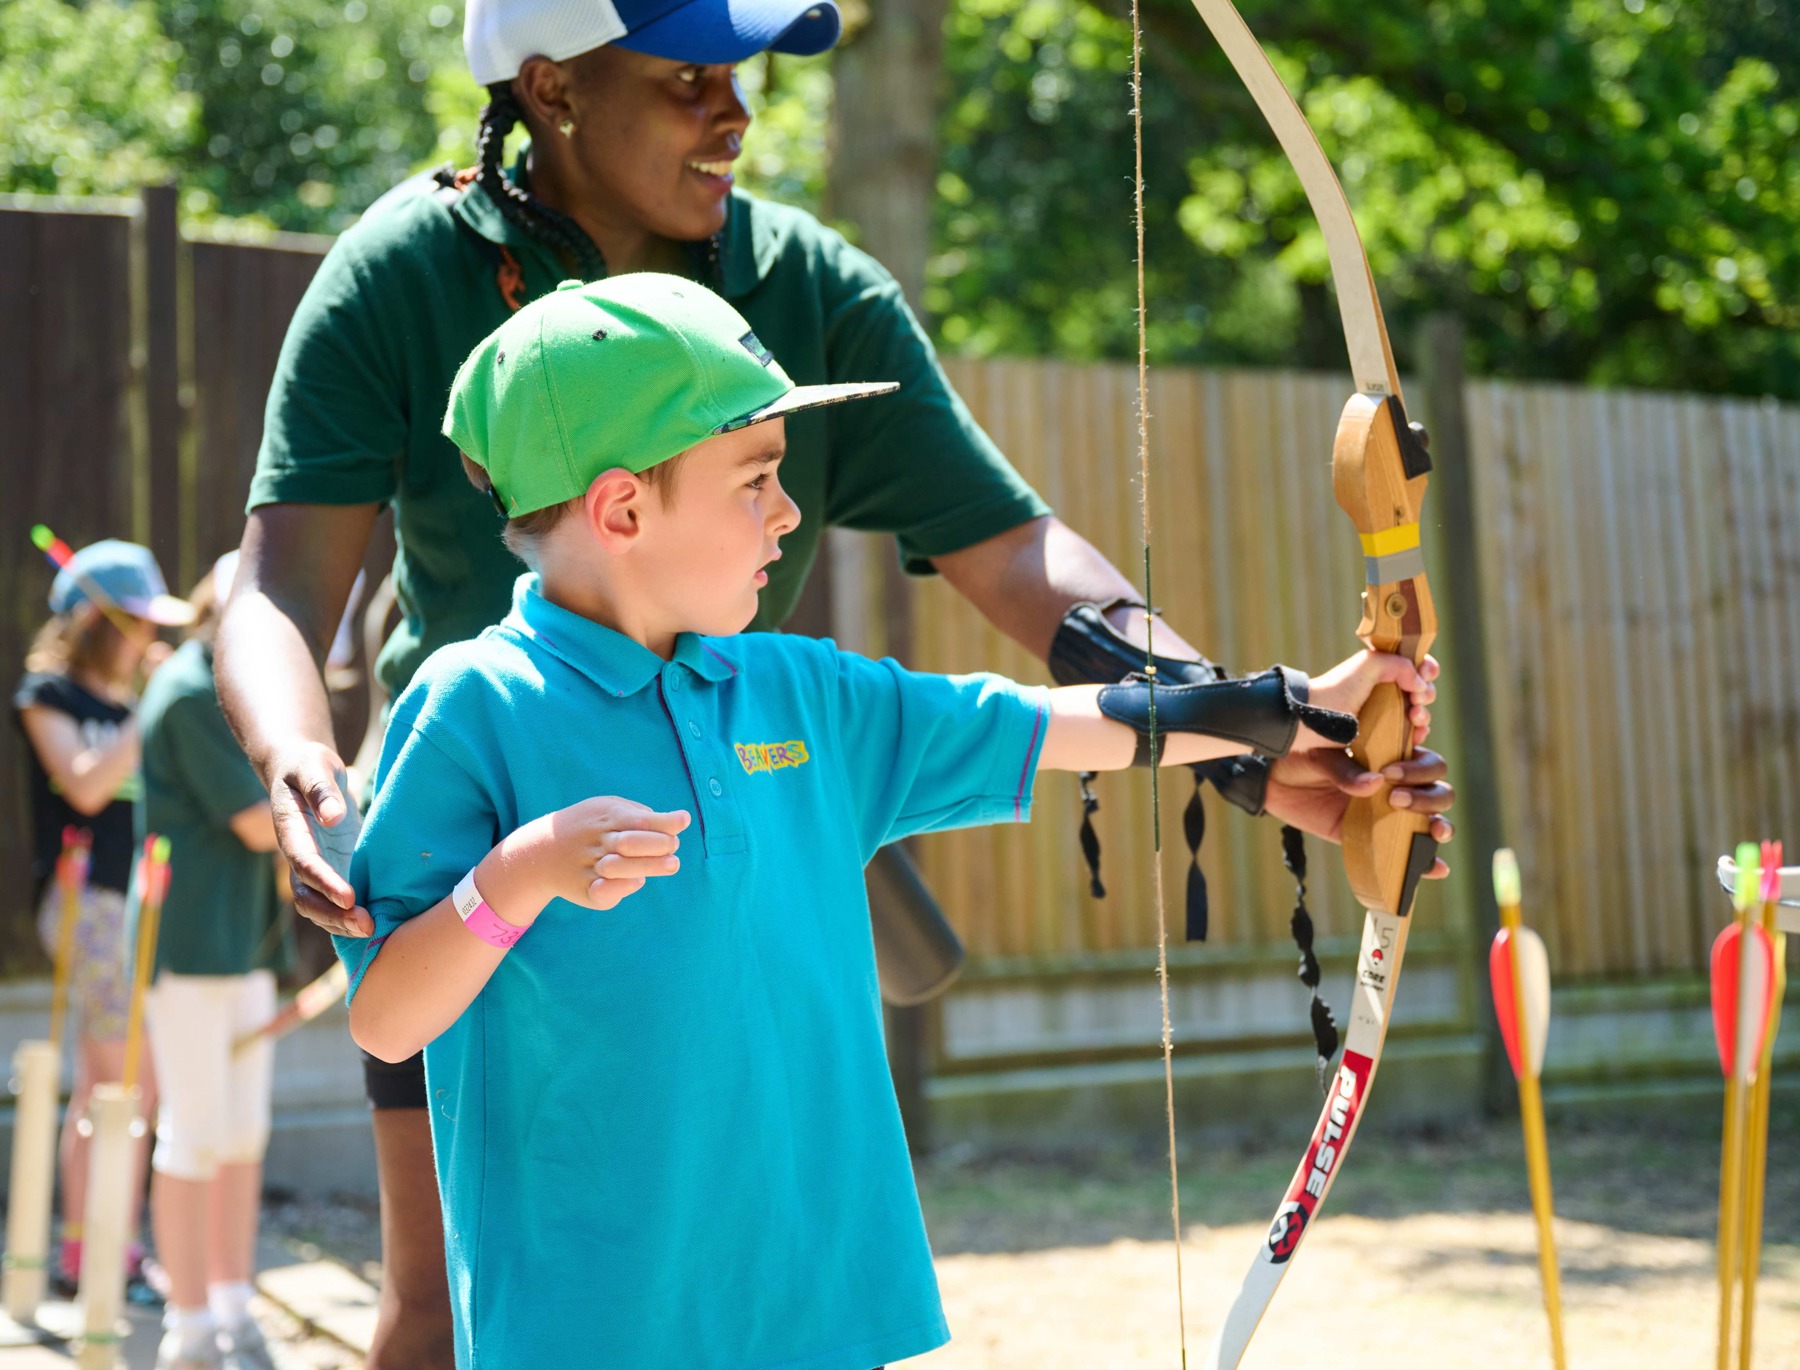 The image shows a Beaver wearing a Beaver blue polo shirt and a green hat, facing to their left. They're holding an archery bow and there's a volunteer in a dark green polo and cap stood behind them to help. The sun is shining and they're outside, and there are other Beavers/Cubs in the background by a wooden fence.